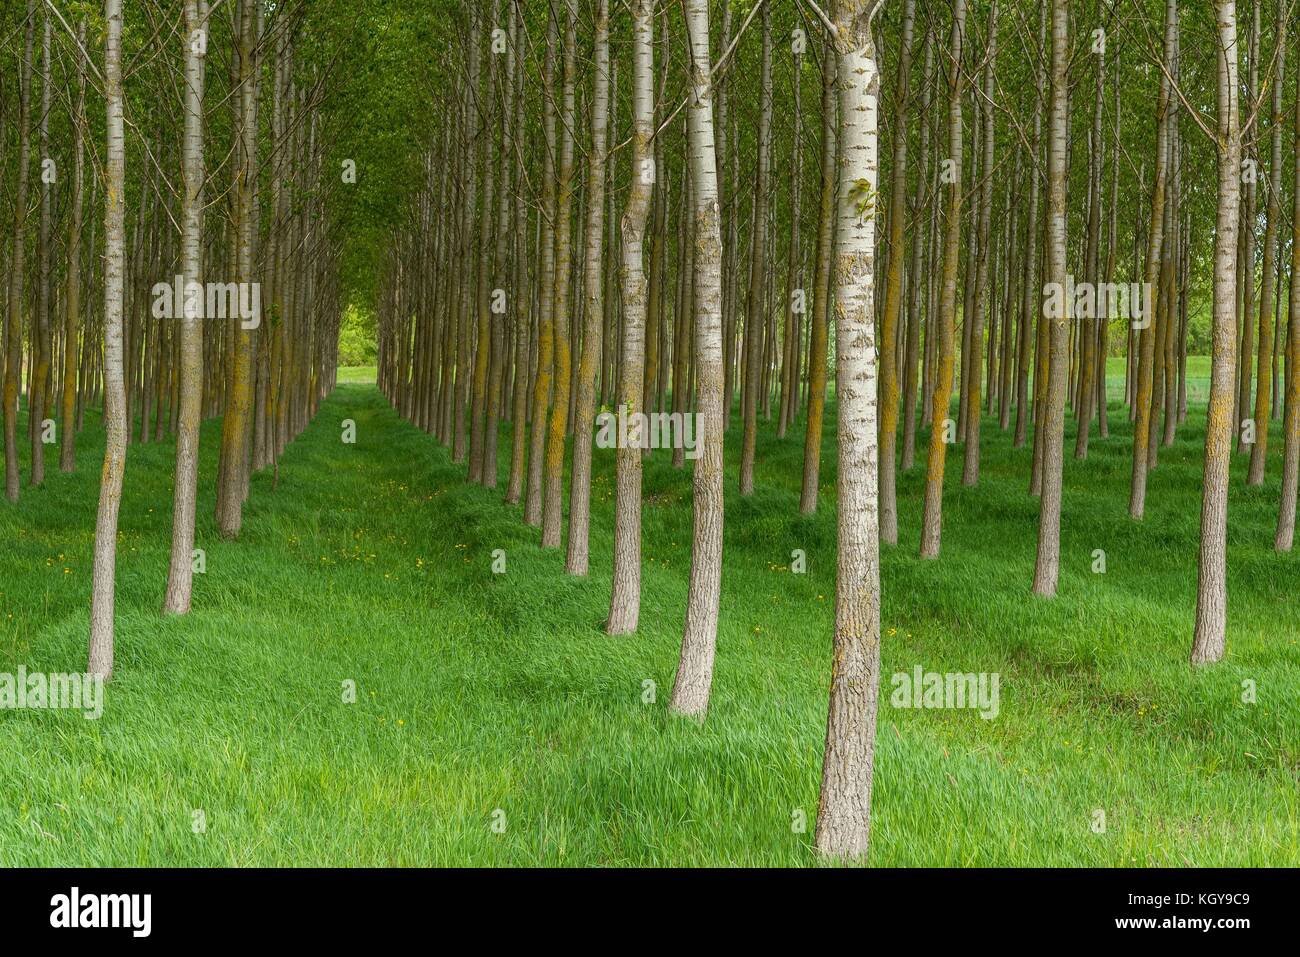 Spring forest scene with high trees. Natural background Stock Photo